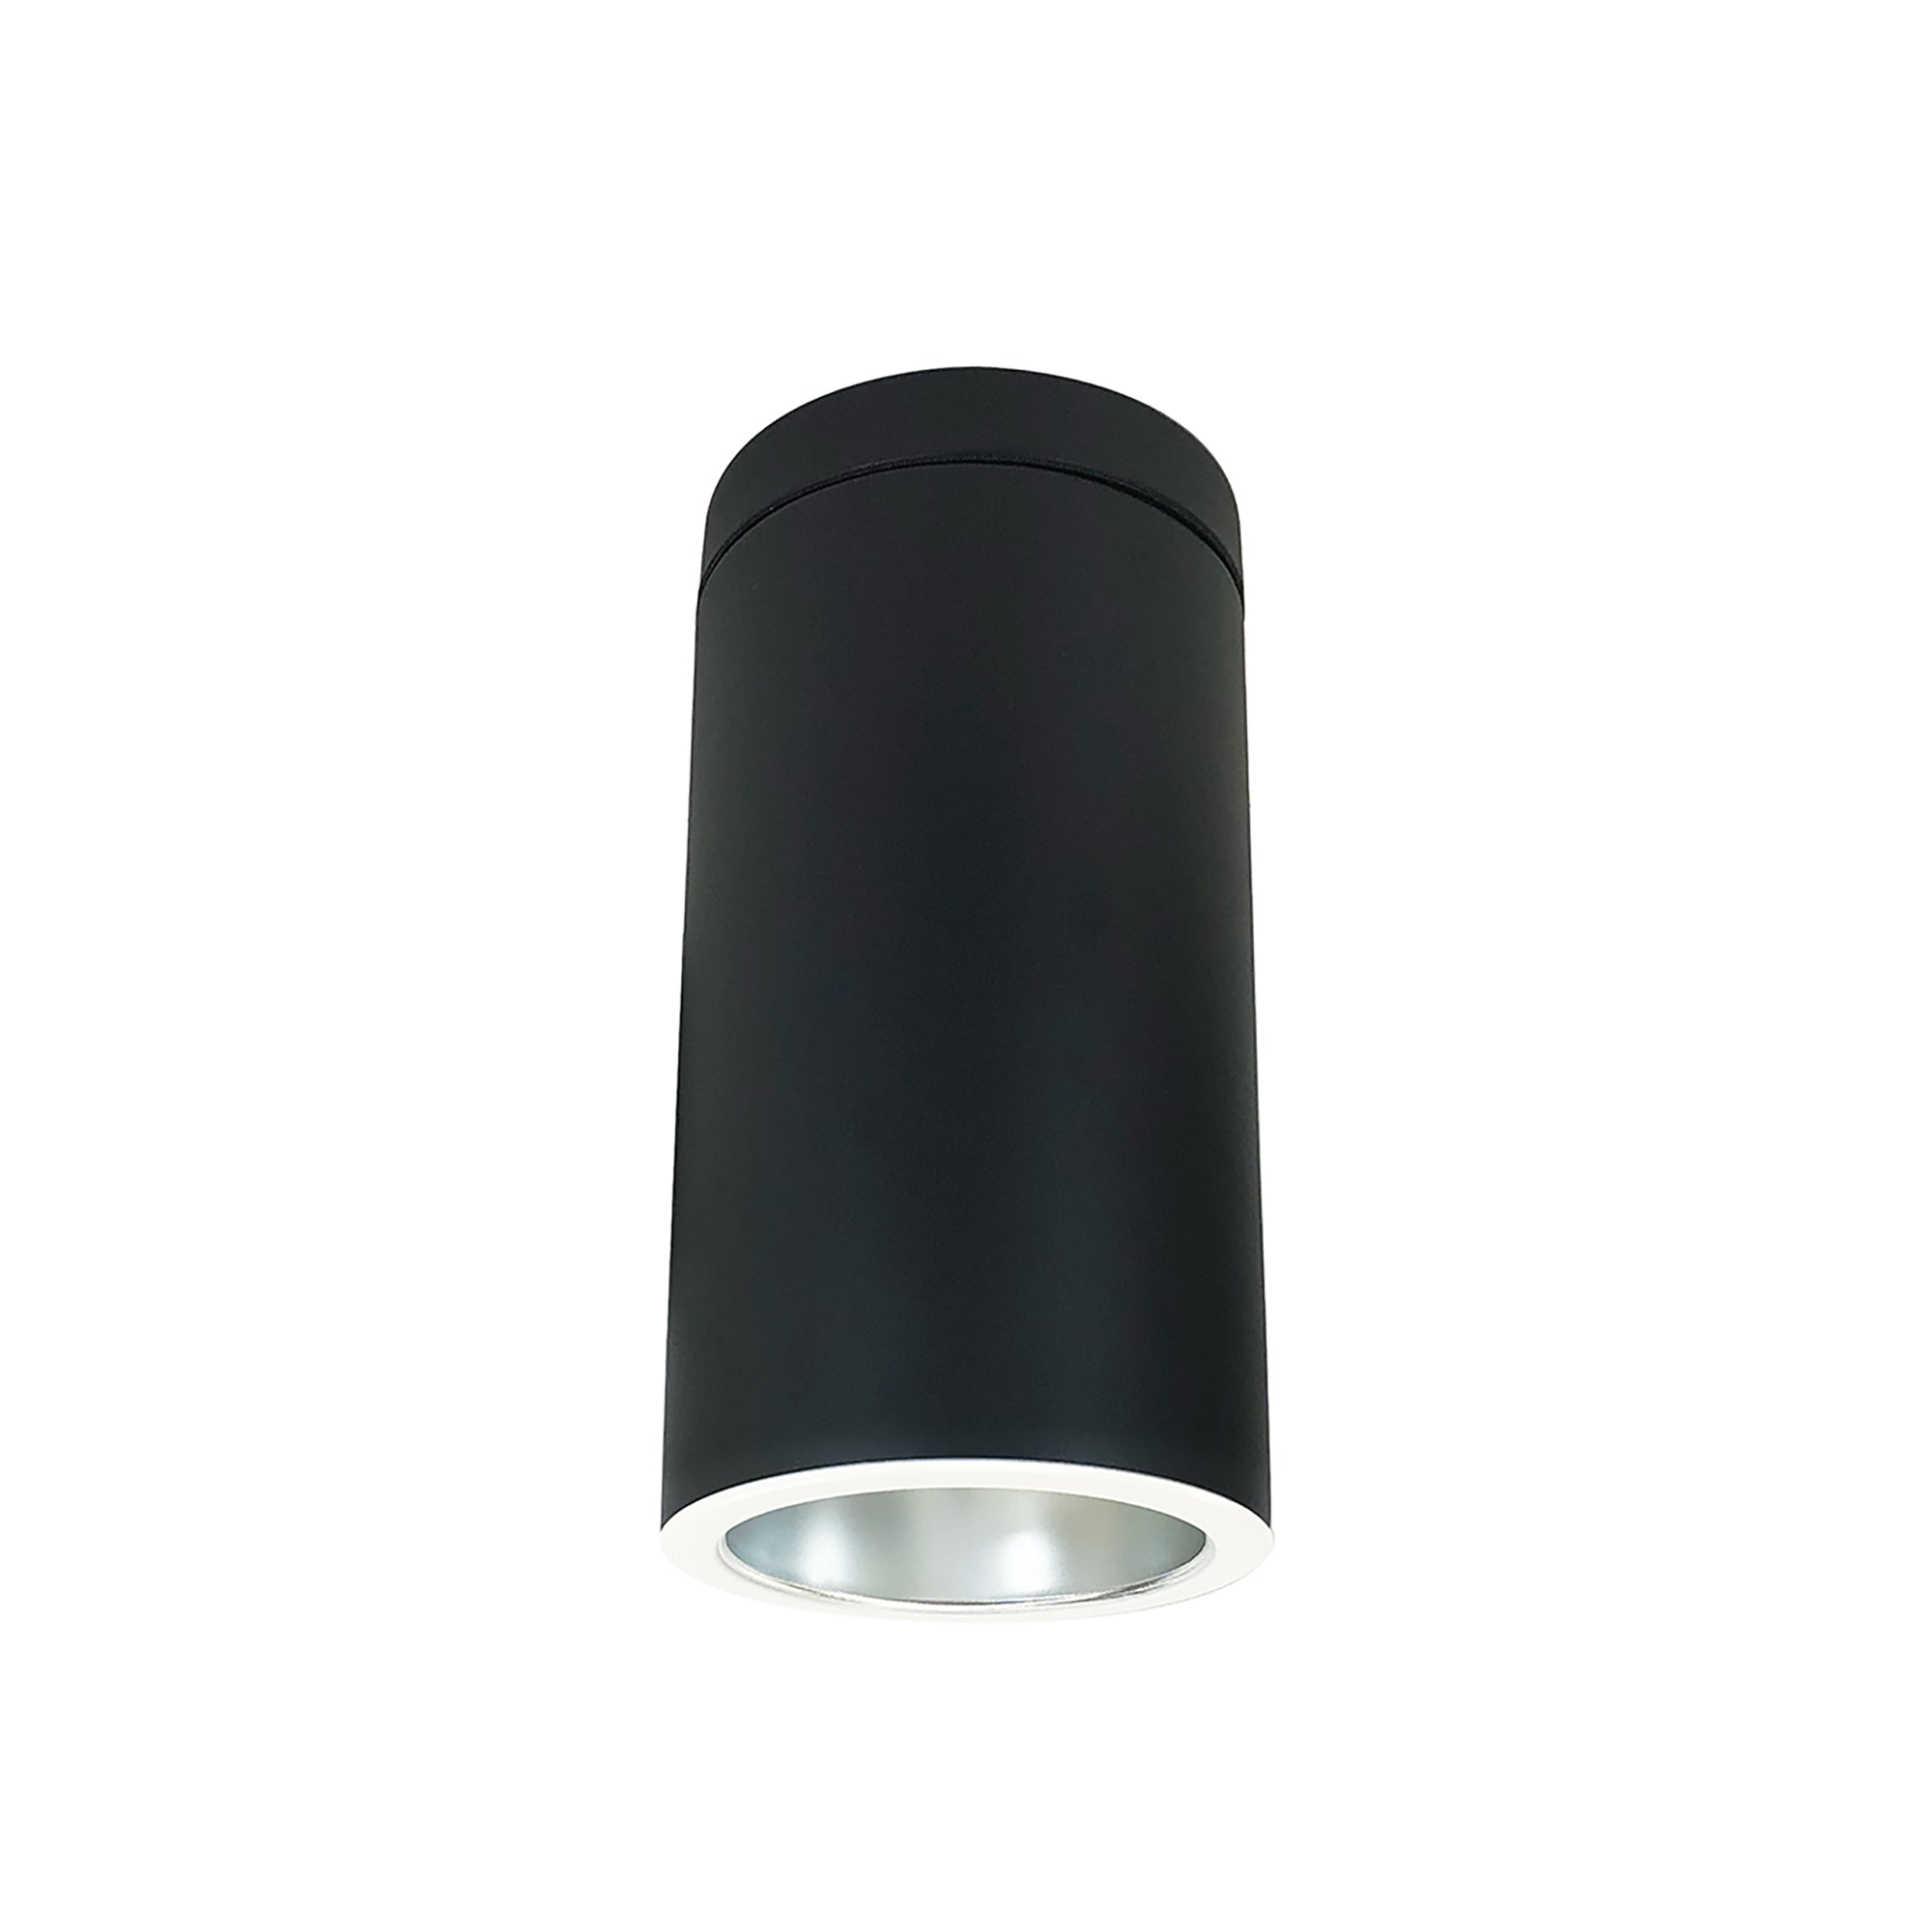 Nora Lighting NYLS2-6S15130FDWB6 - Cylinder - 6 Inch CYL SURFACE 1500LM REF FLOOD 30K DIFF/WHT BLK CYL 120-277 0-10V